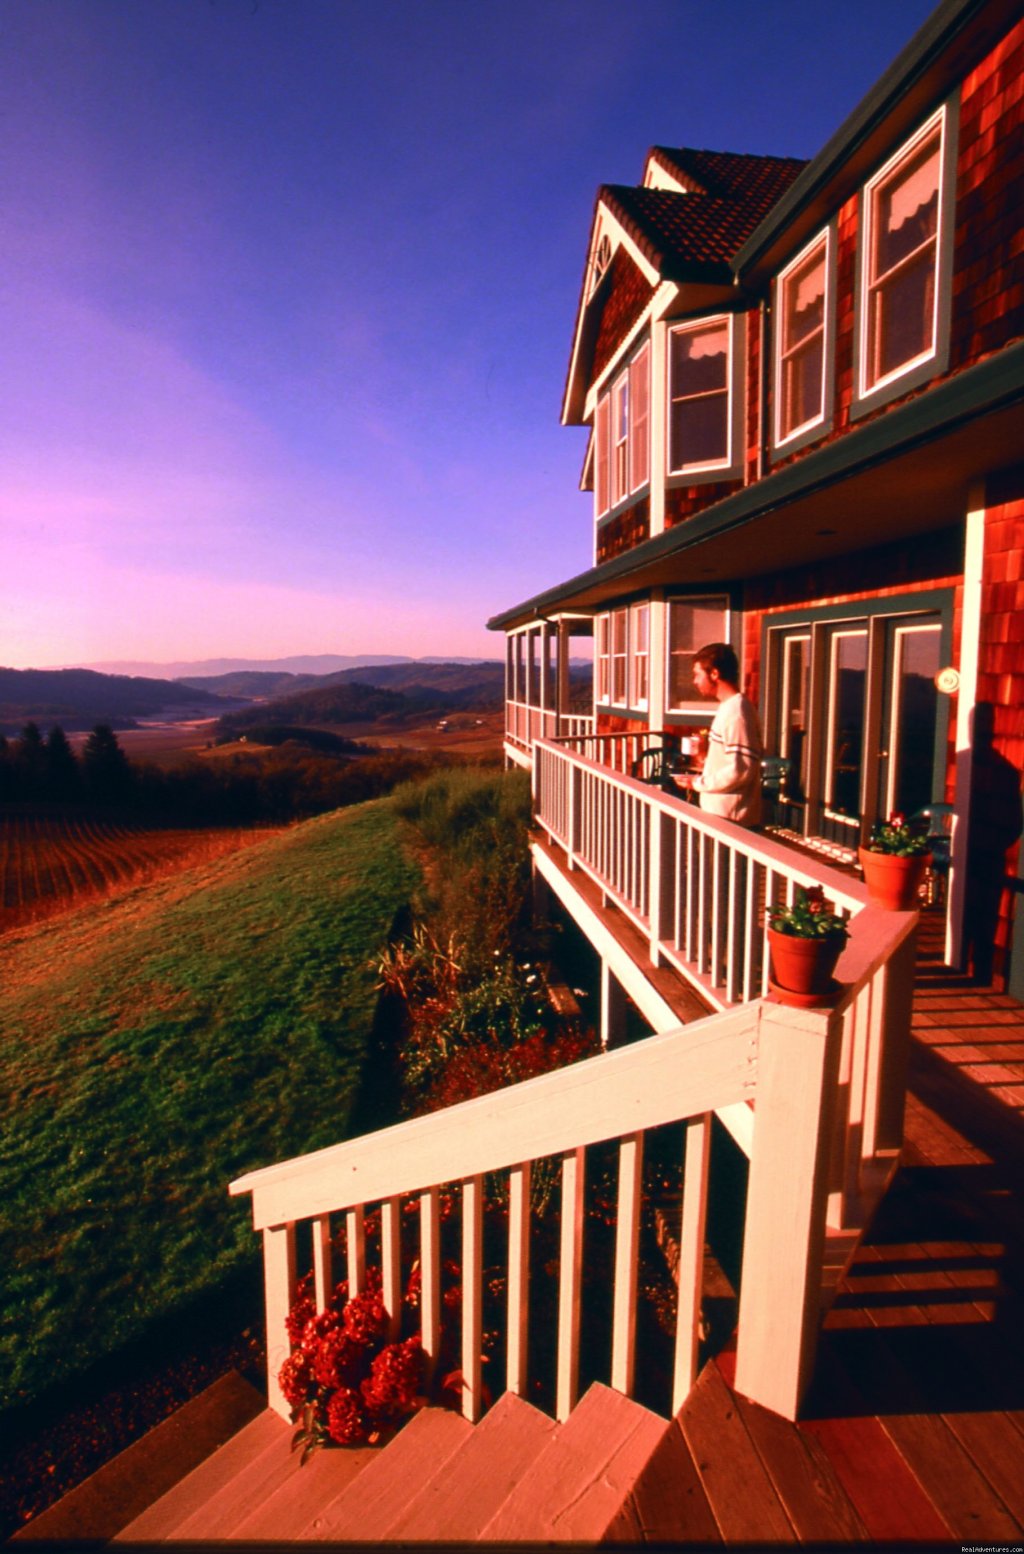 A spectacular view in every direction! | Oregon's Premier Wine Country Inn - Youngberg Hill | McMinnville, Oregon  | Bed & Breakfasts | Image #1/4 | 